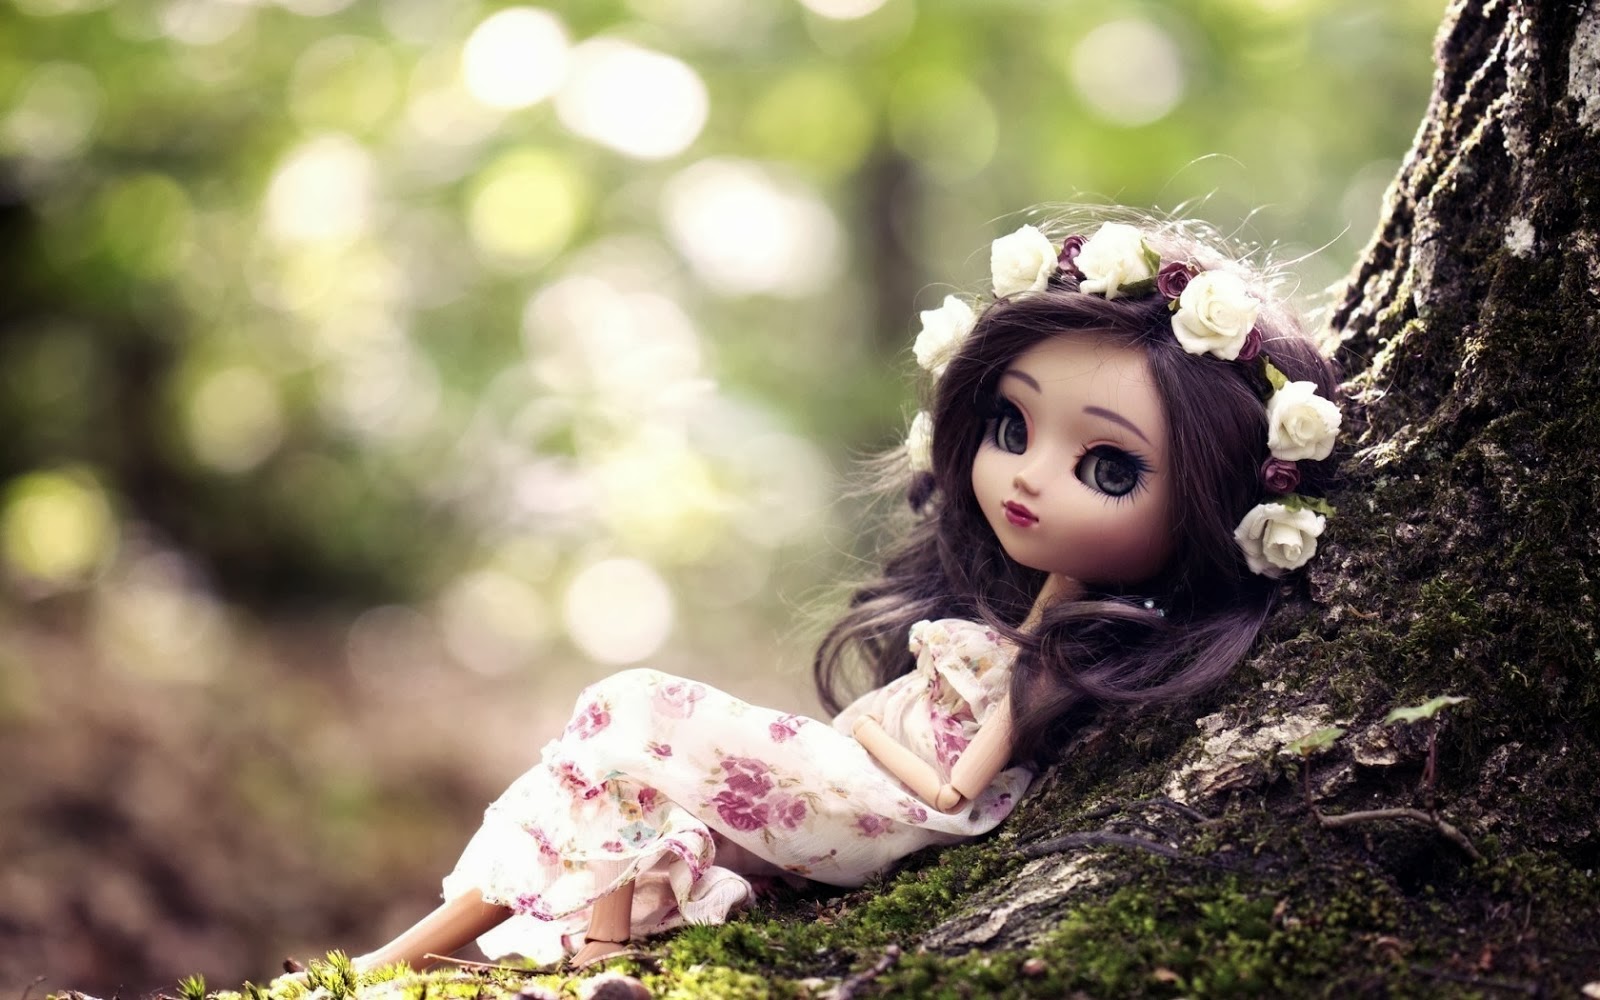 HD Wallpaper And Image Of Cute Dolls Which Are Given Below